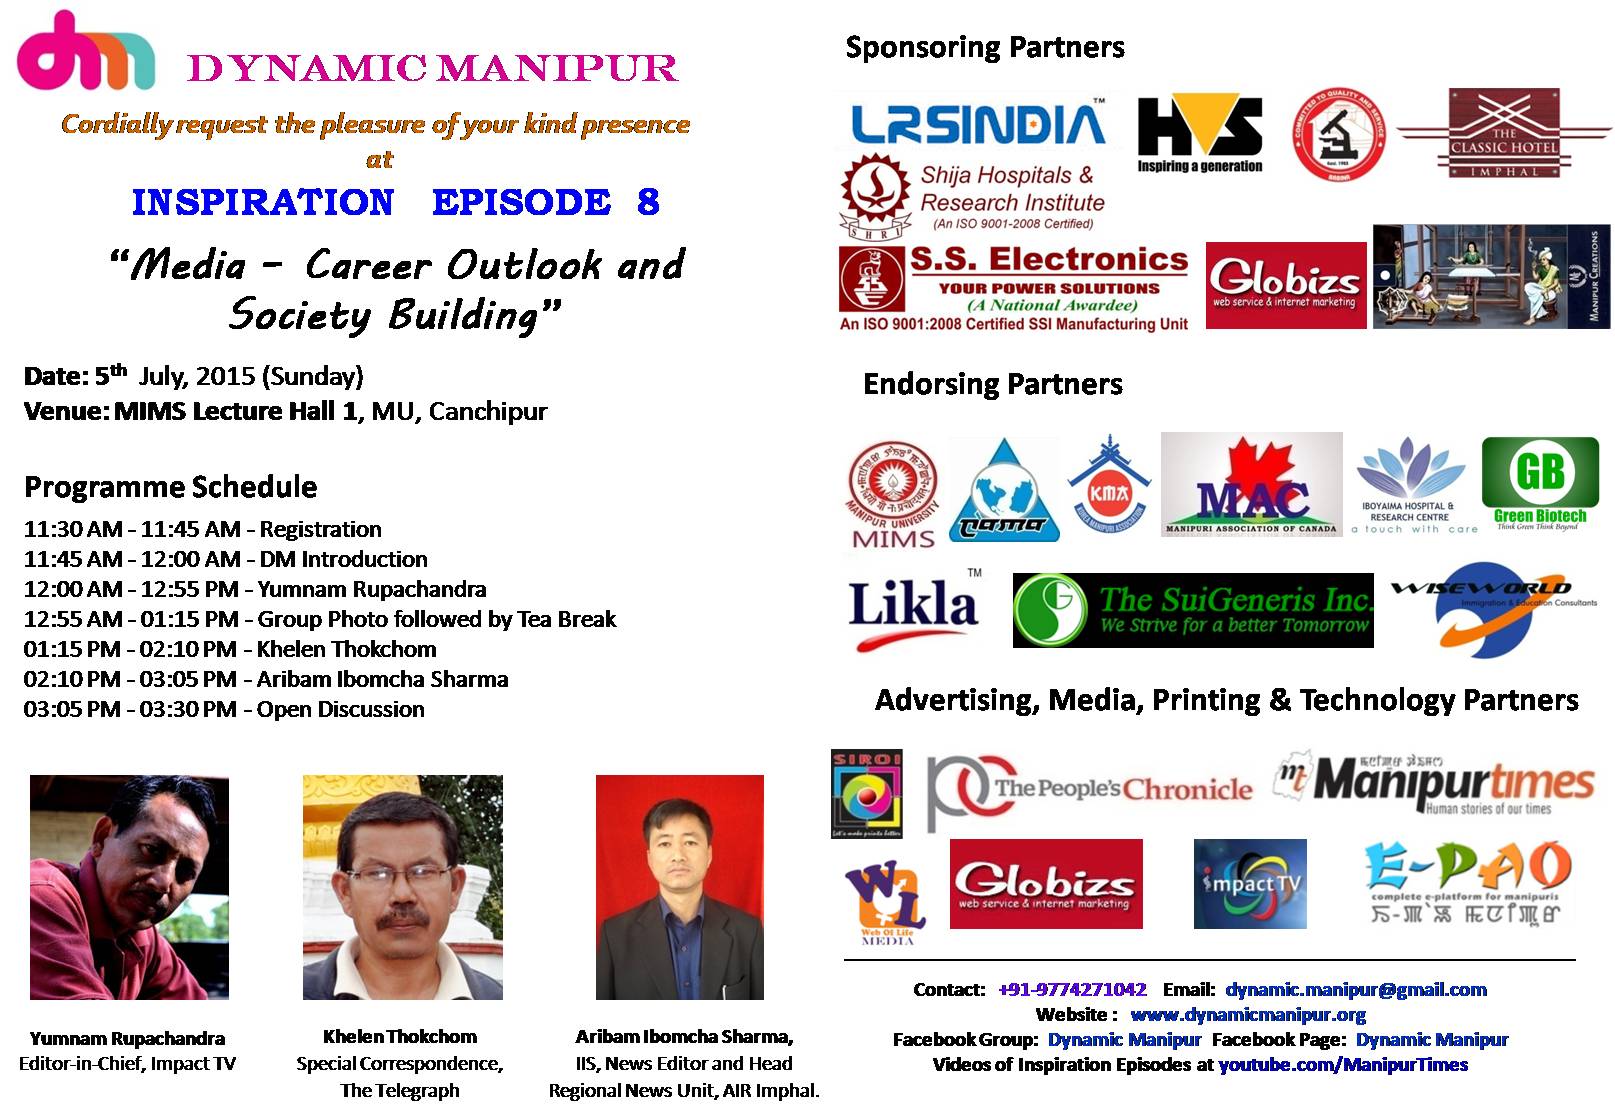 Dynamic Manipurs Inspiration Episode 8 on 'Media  Career Outlook and Society Building'